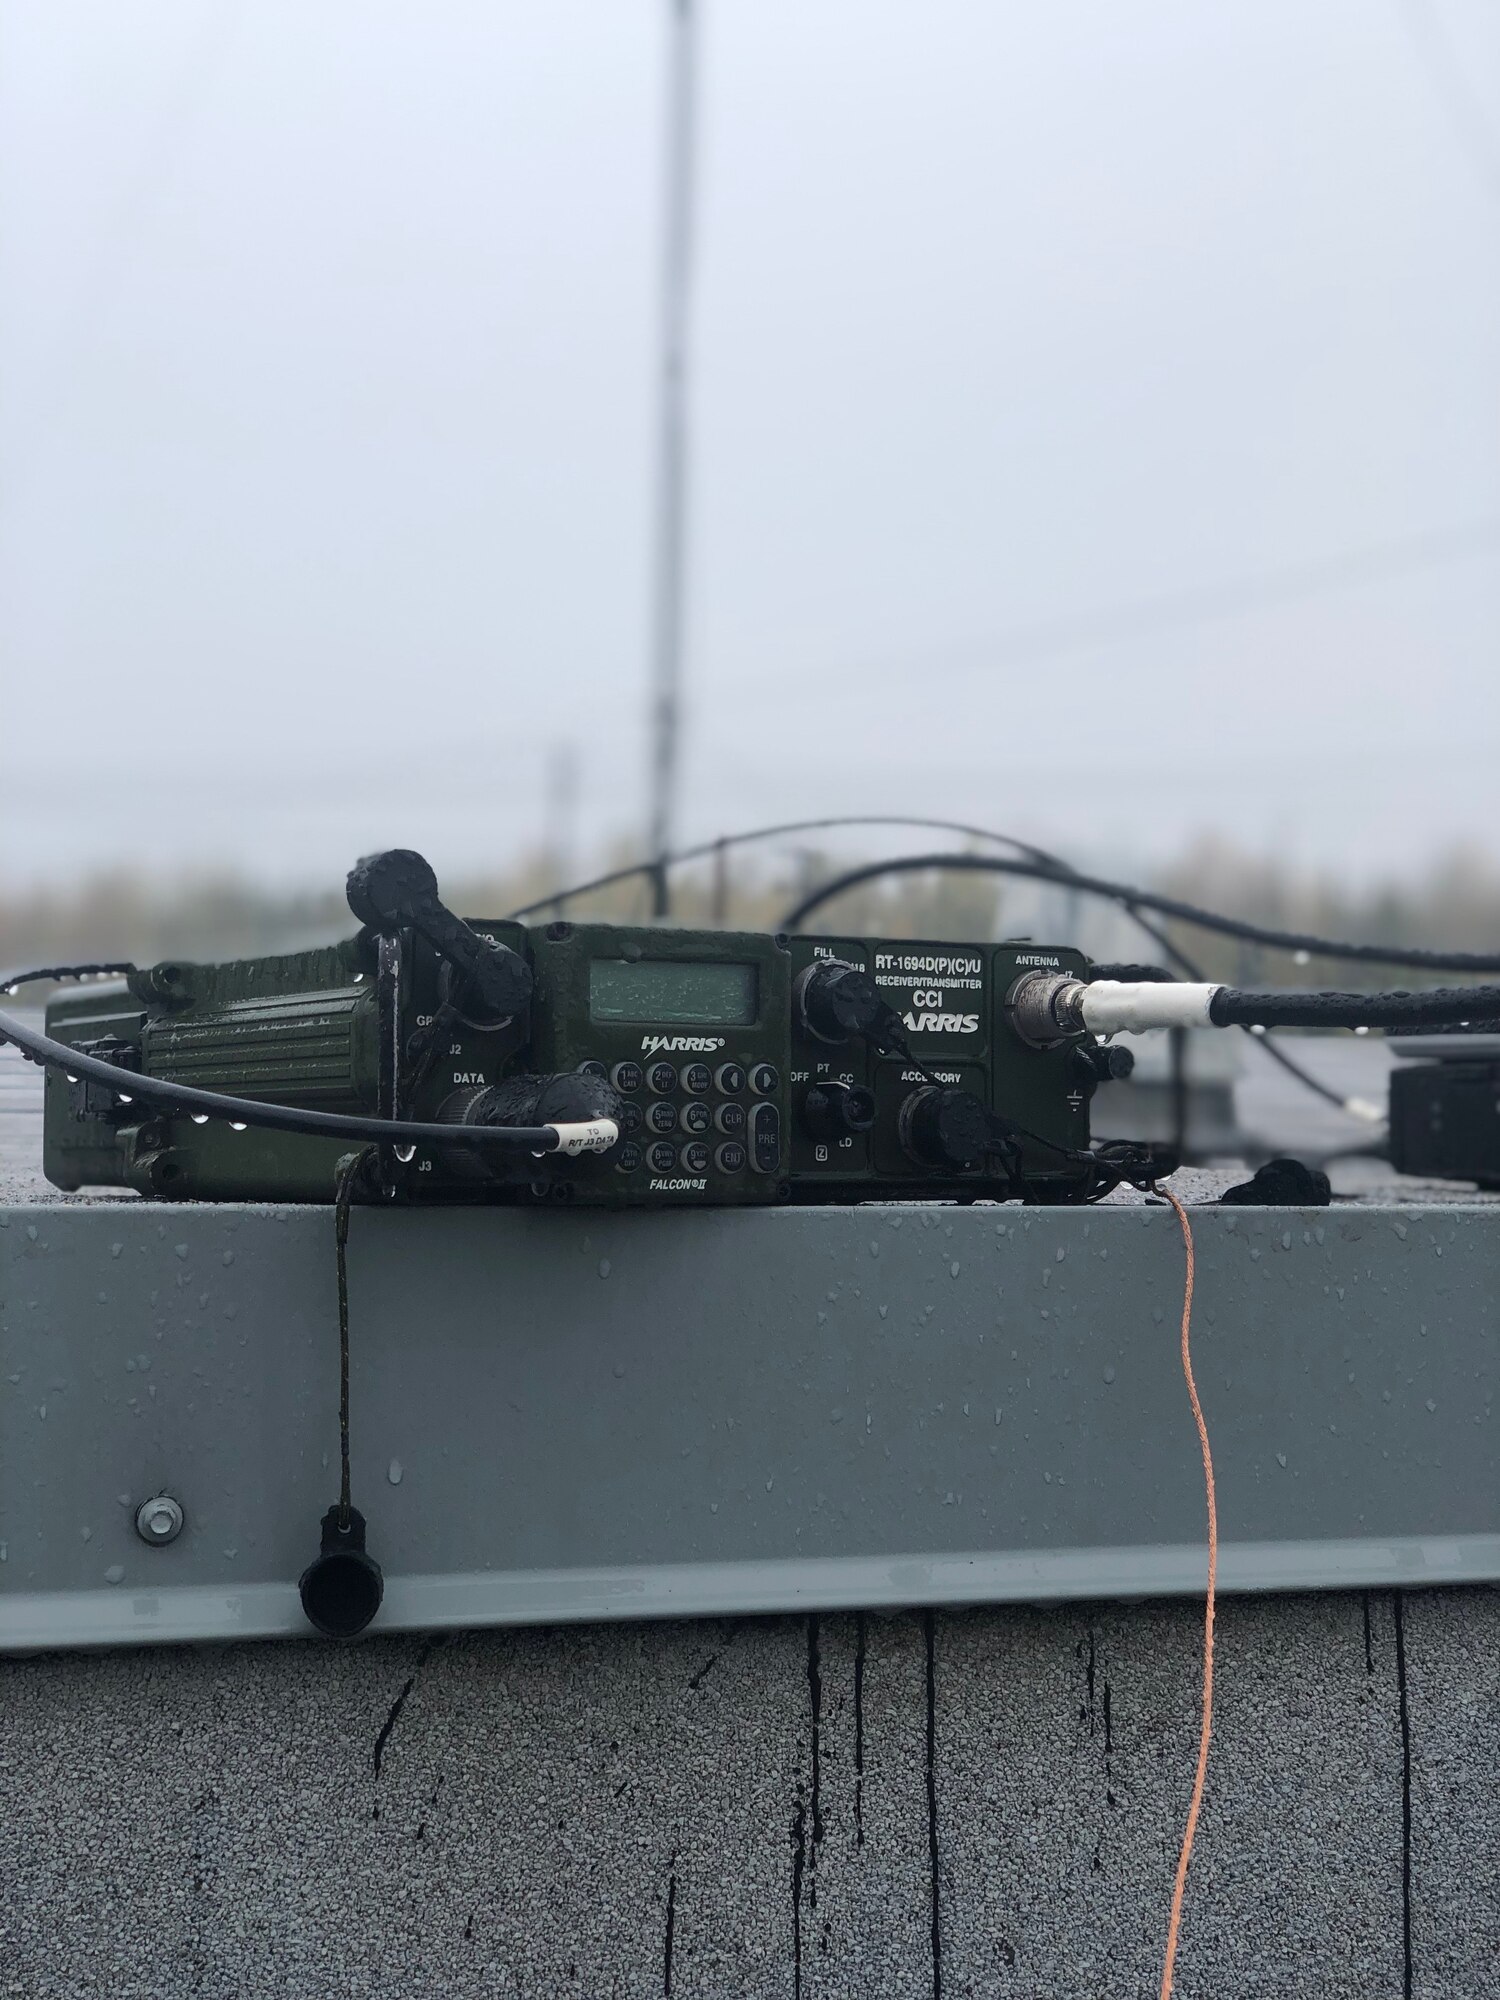 Explosive Ordnance Disposal Group One established high-frequency radio communications from Joint Base Elmendorf-Richardson in Anchorage, Alaska to Explosive Ordnance Disposal Mobile Unit One operating over 2,000 miles away in Adak, Alaska during Arctic Expeditionary Capabilities Exercise  (AECE) 2019 with high-frequency antennas (pictured). Explosive Ordnance Disposal Group One is testing a variety of communications to prepare for operating in austere environments supporting EOD forces in eliminating explosive threats. AECE is one in a series of U.S. Indo-Pacific Command exercises in 2019 that prepares joint forces to respond to crises in the Indo-Pacific.